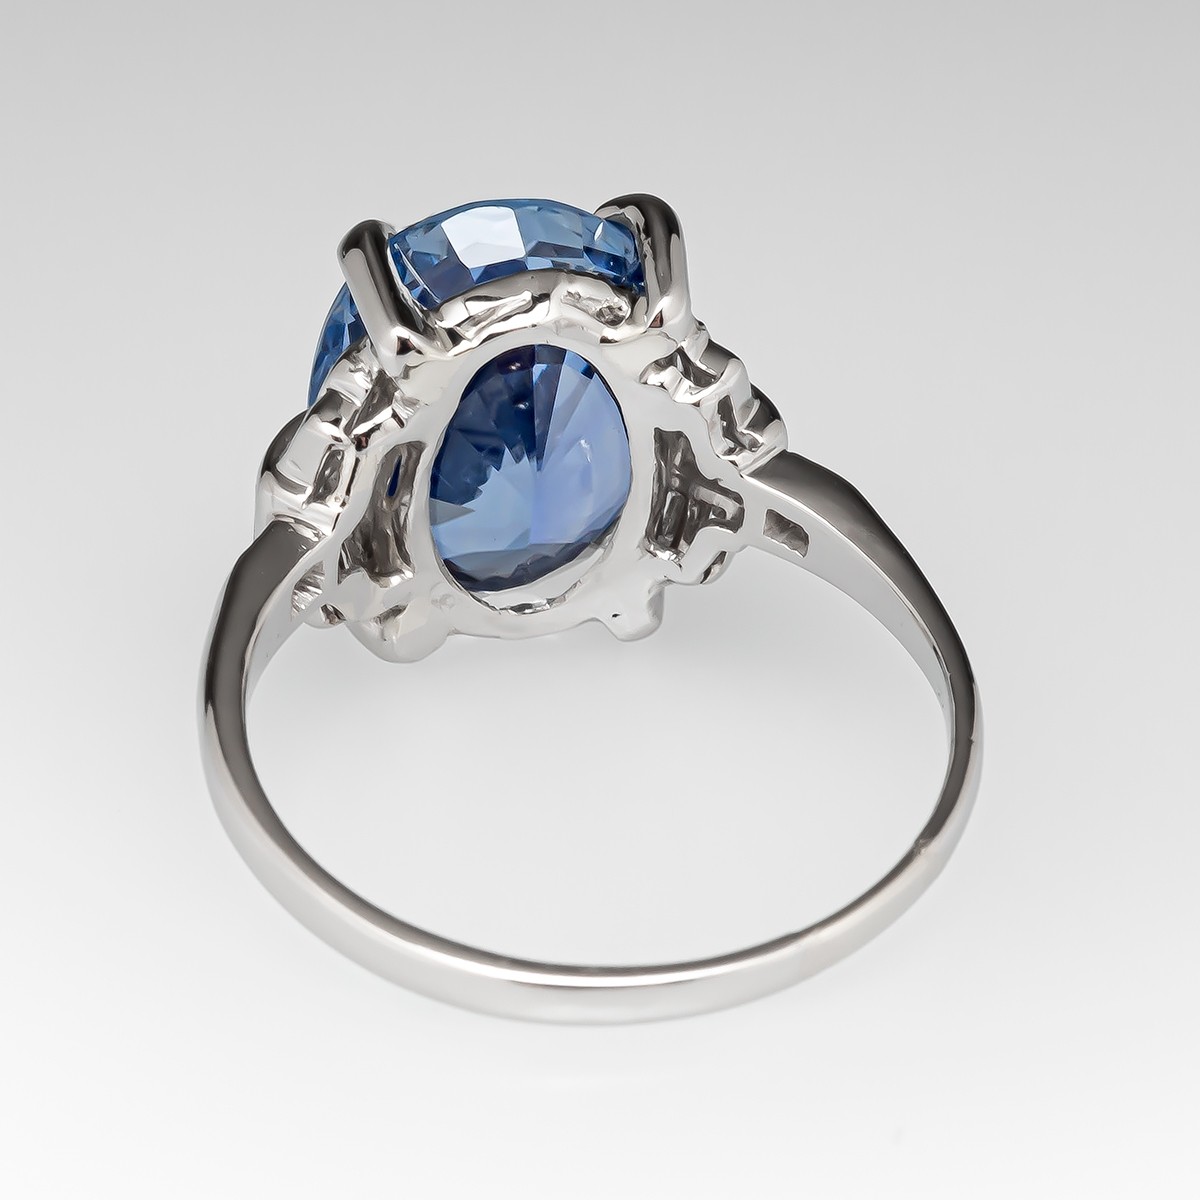 Details about   925 Sterling Silver Handmade Certified 7 CT Blue Sapphire Engagement Gift Ring